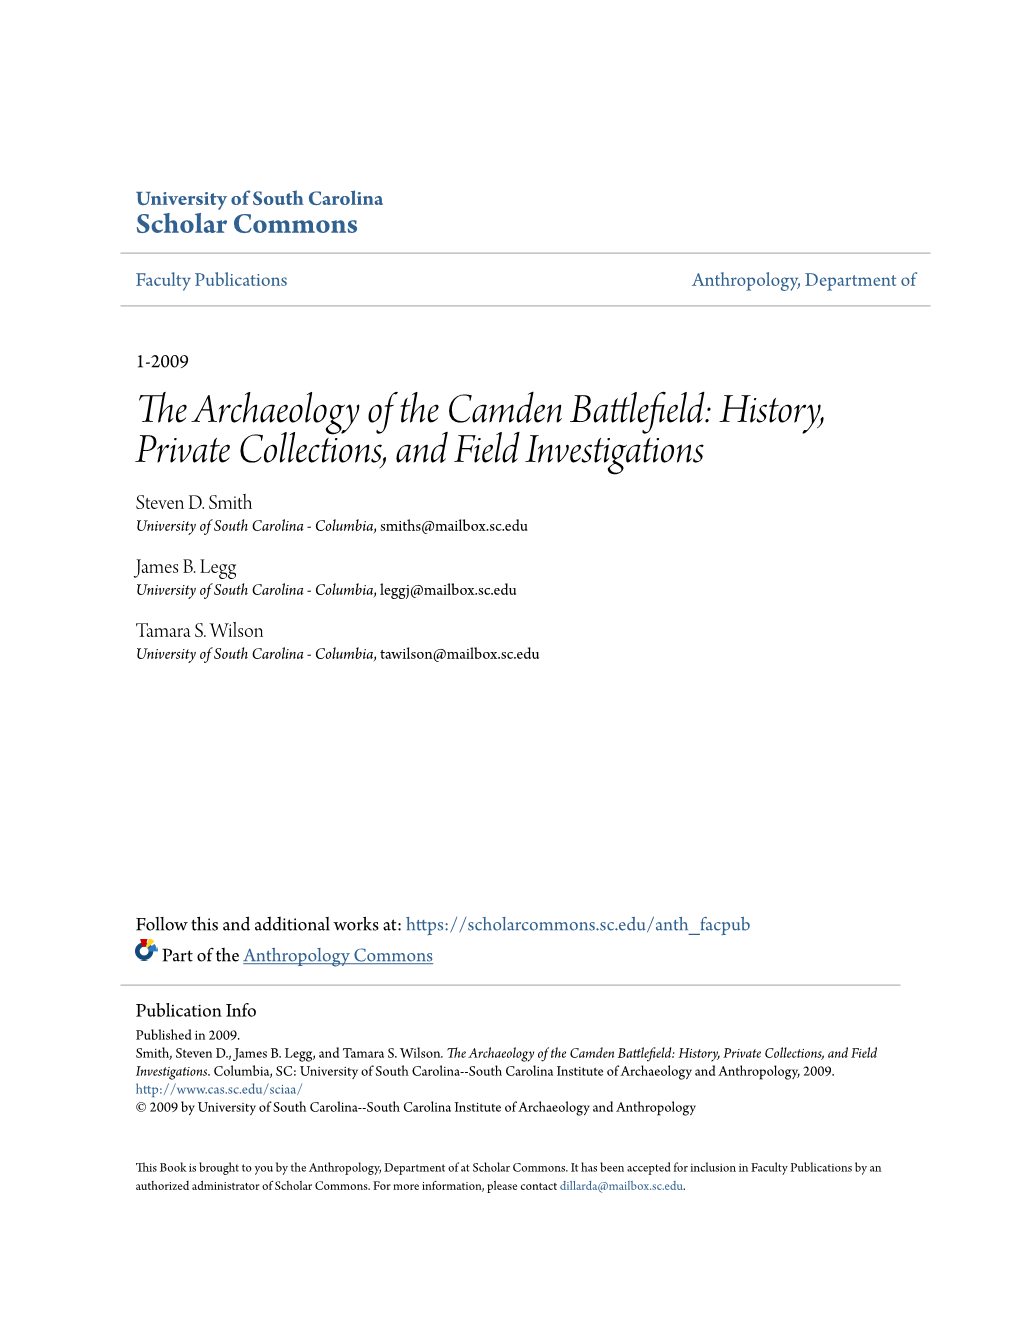 The Archaeology of the Camden Battlefield: History, Private Collections, and Field Investigations Steven D